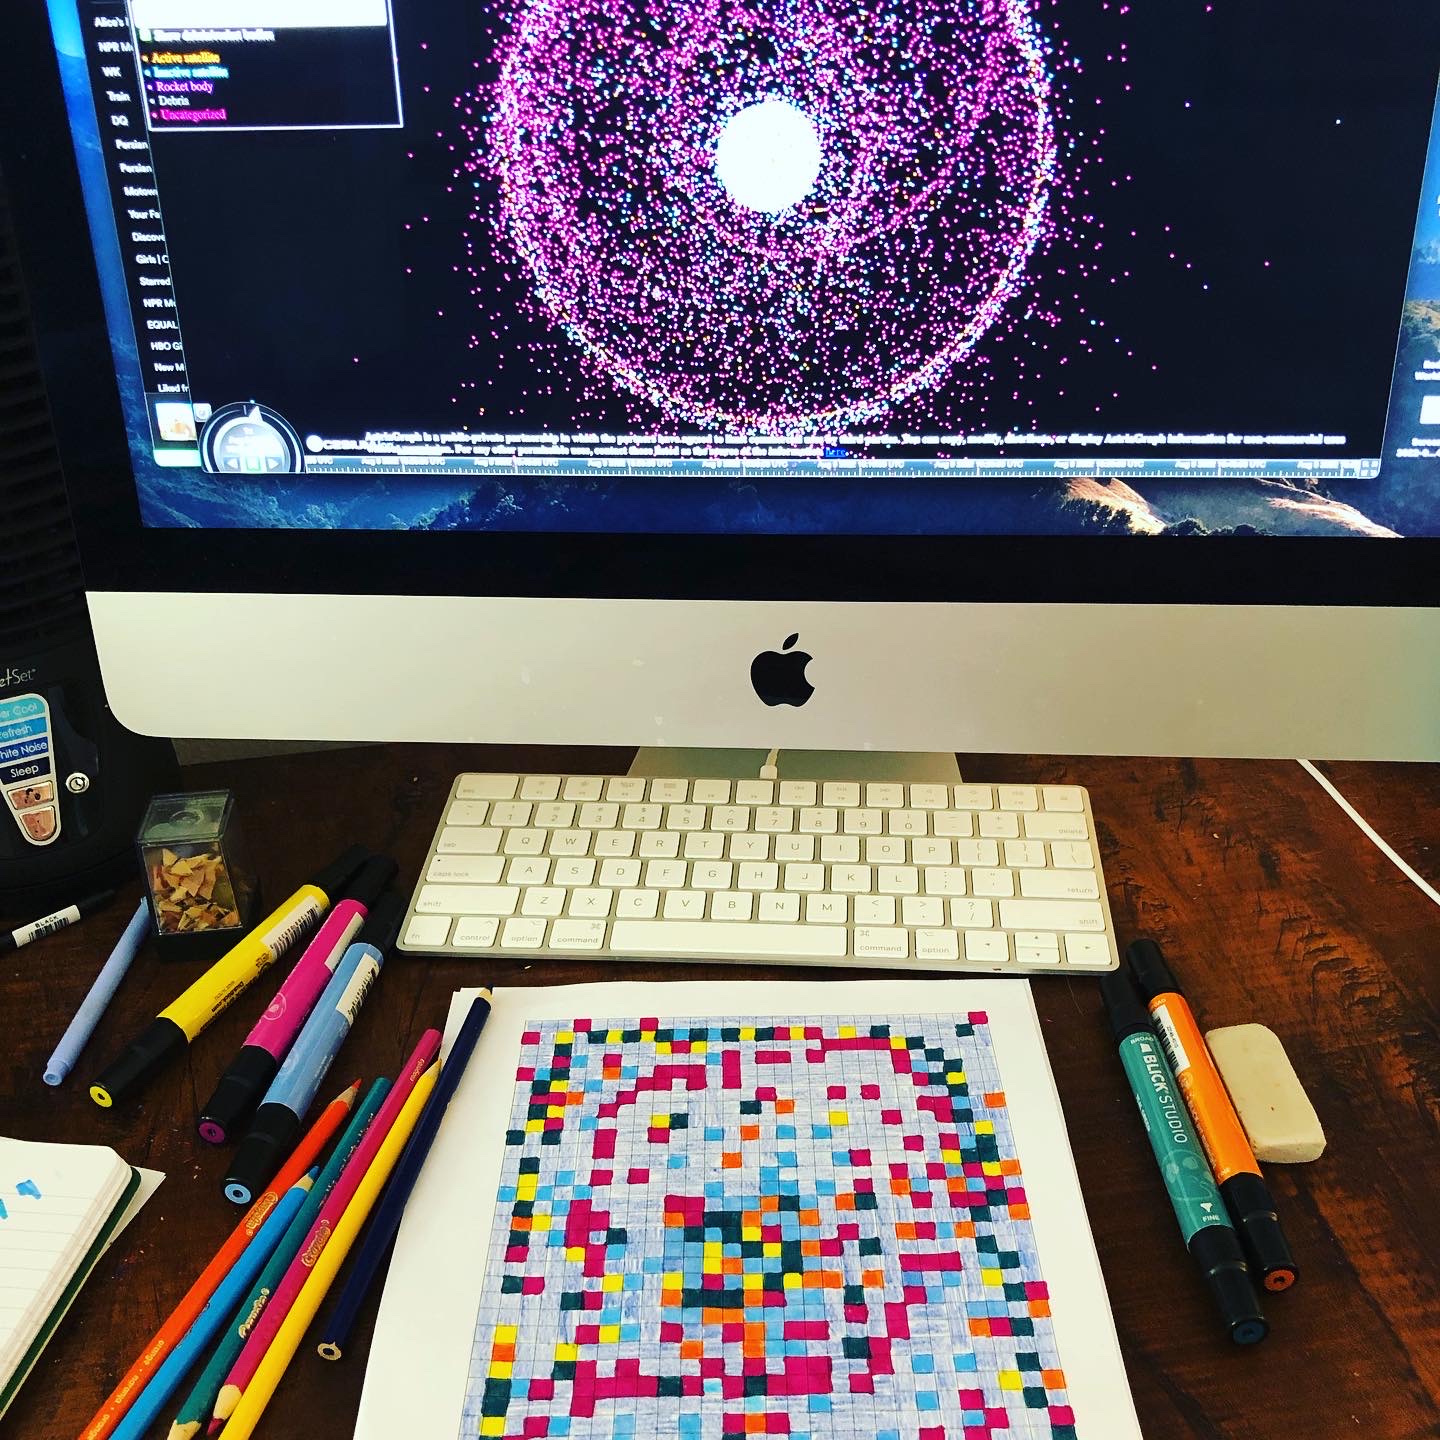 A piece of grid paper filled in with different bright colors is displayed alongside a computer screen that shows a representation of space junk in the form of small dots in a circle.